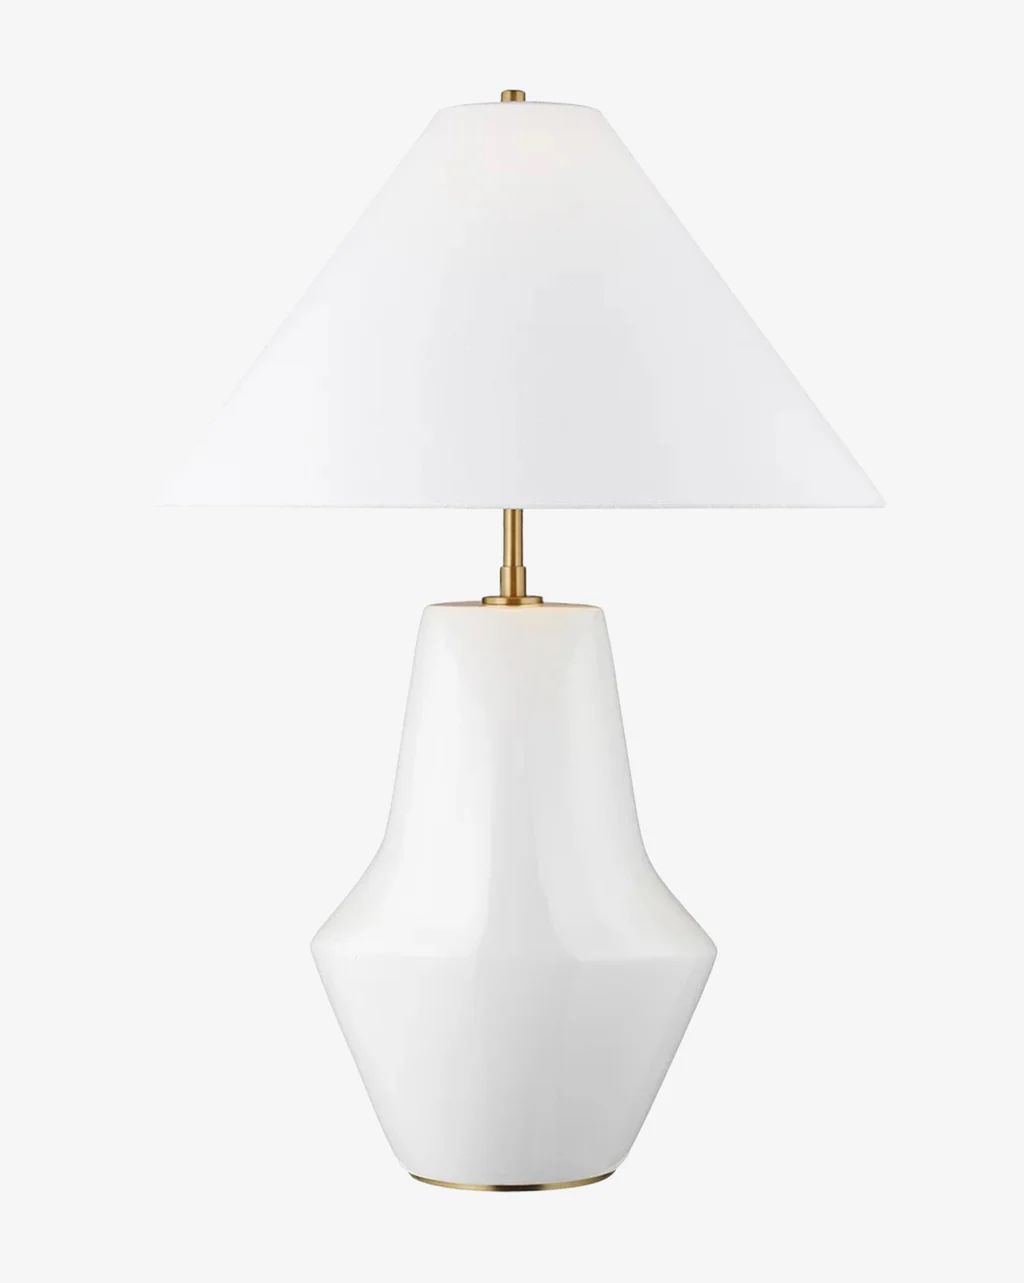 Contour Table Lamp | McGee & Co.